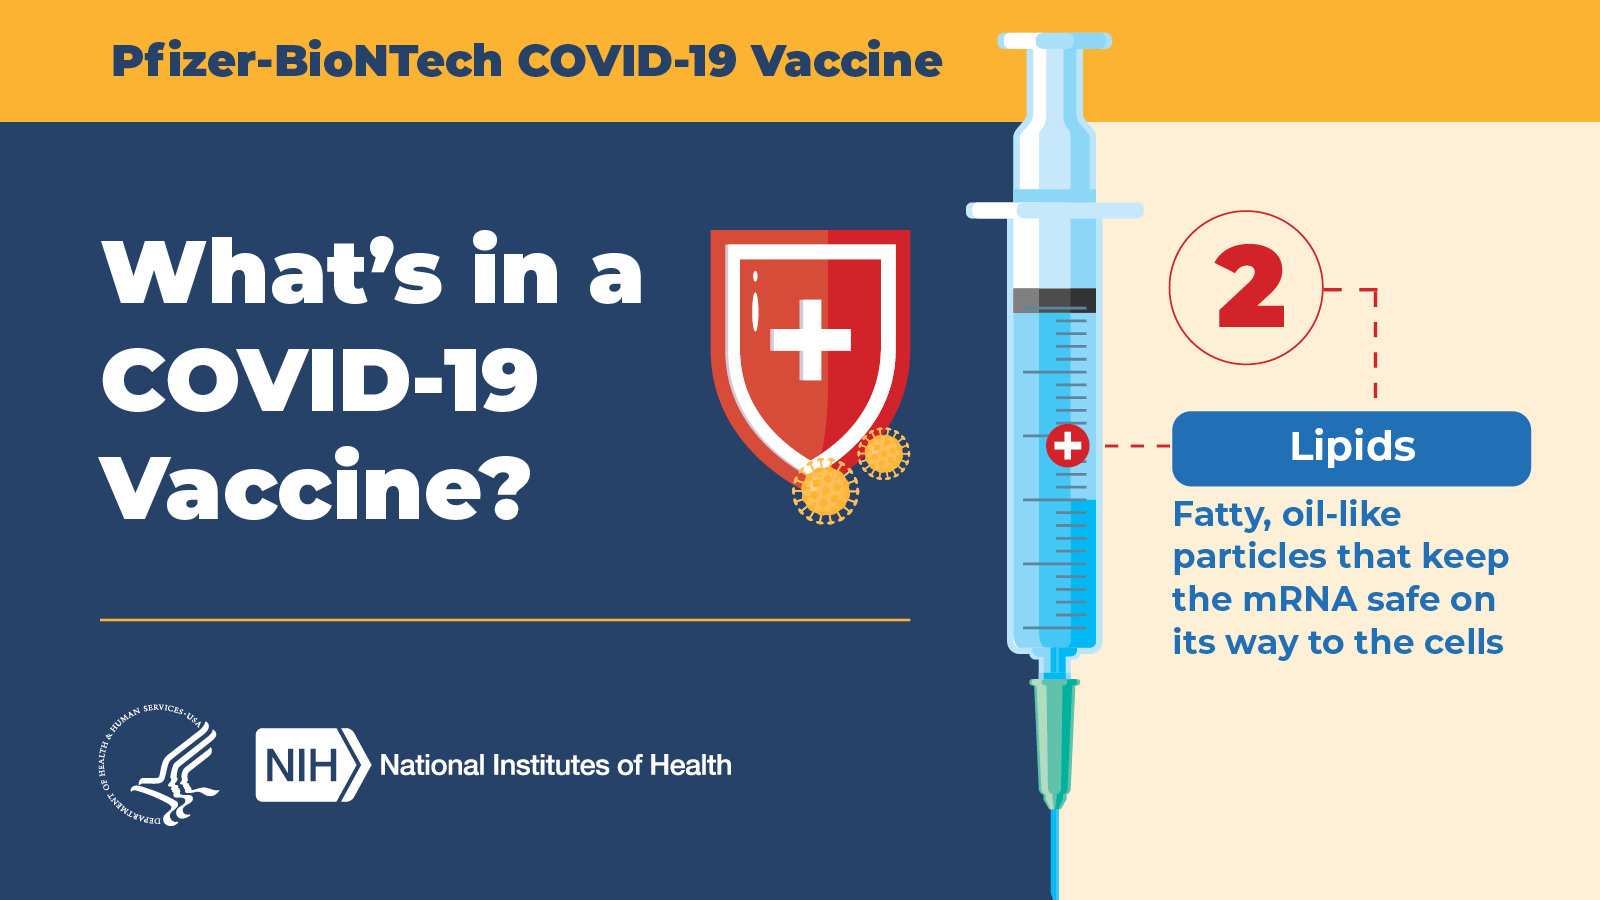 Pfizer-BioNTech COV ID-19 Vaccine  |  What's in a COVID-19 vaccine? 2: Lipids: Fatty, oil-like particles that keep the mRNA safe on its way to the cells